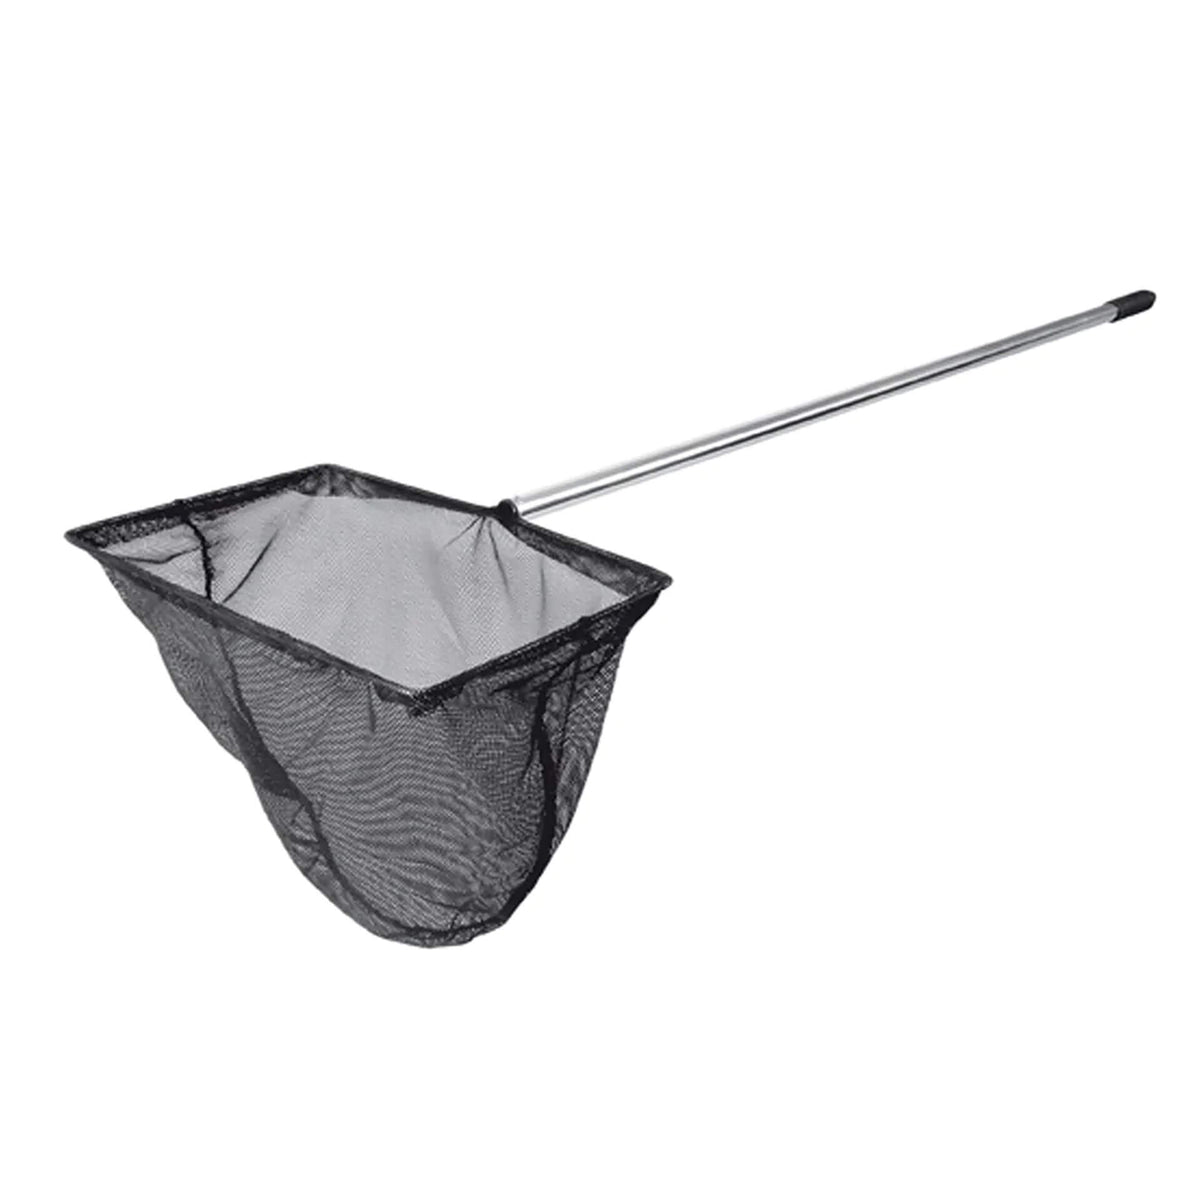 PondMAX Stainless Steel Fish Net - 300 x 210mm - In Store Pick Up Only